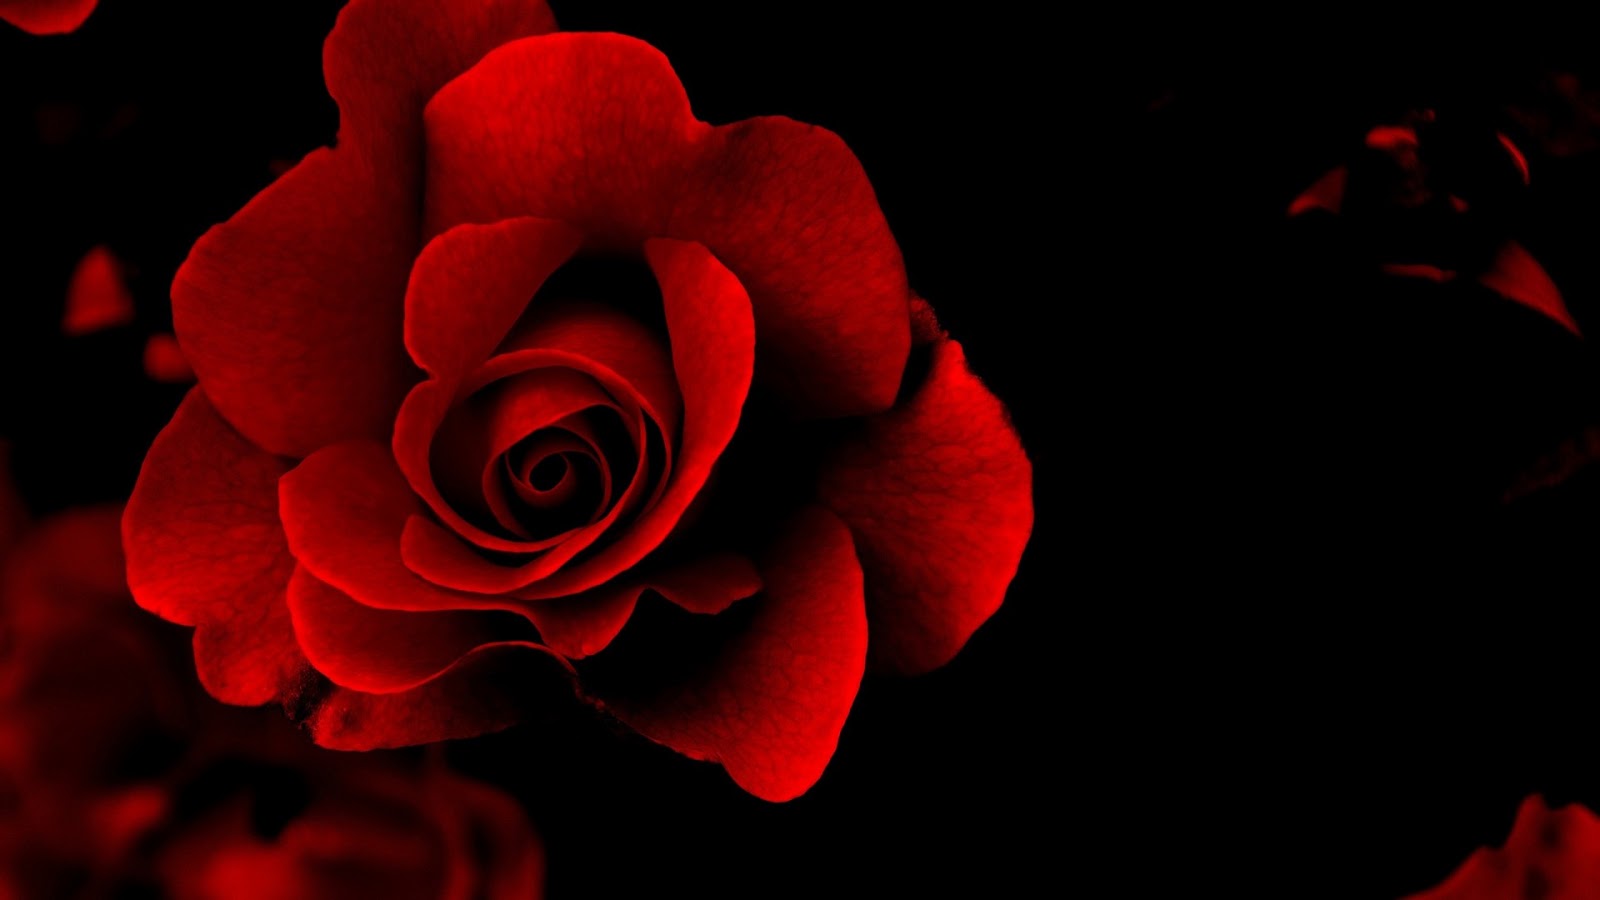 Flowers Wallpaper Red Rose Pictures Image